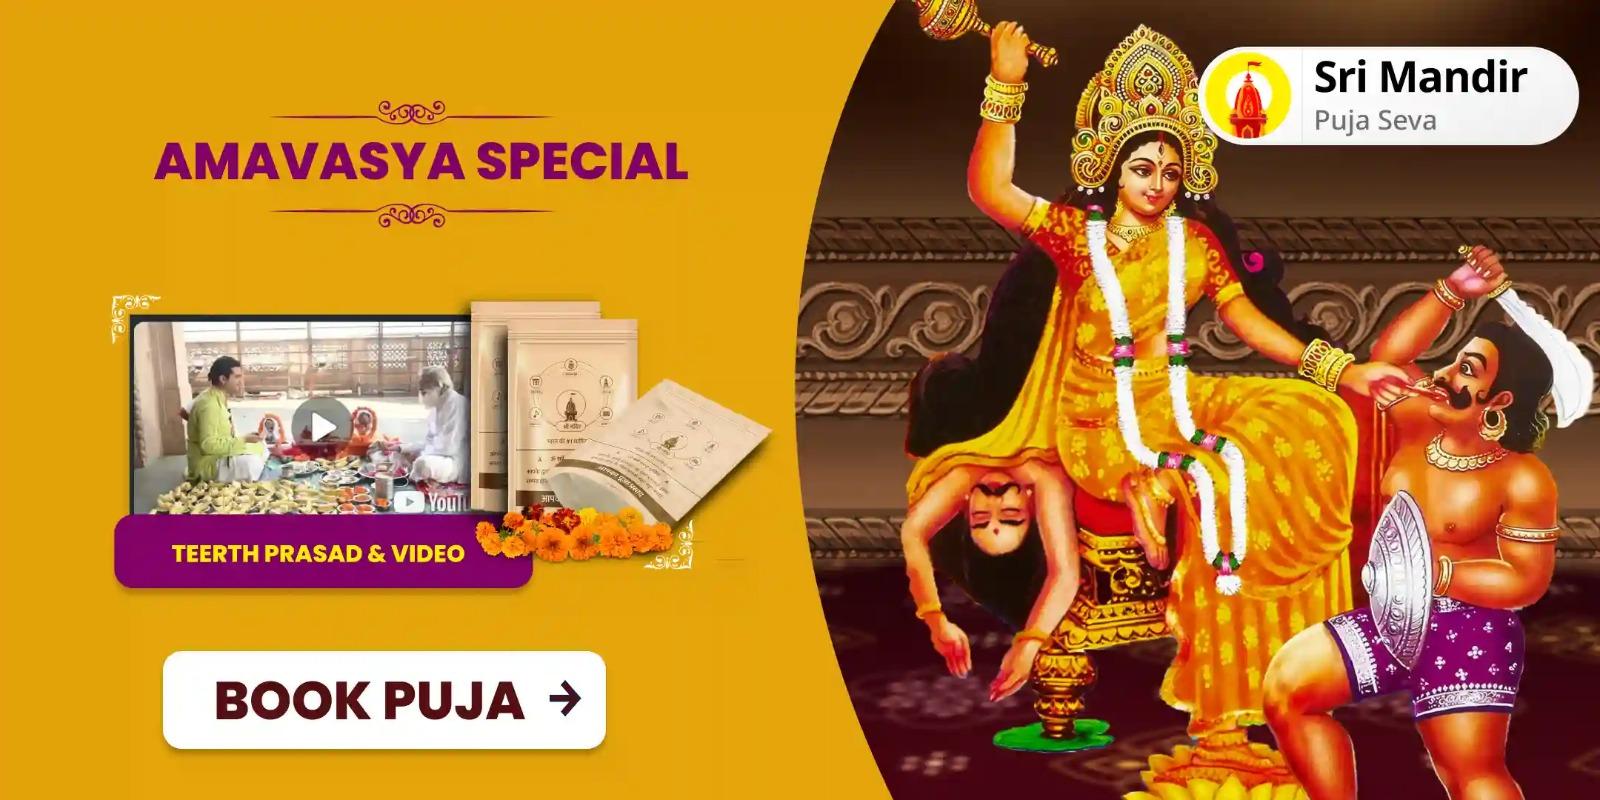 Amavasya Special Maa Bagalamukhi Tantra Yukta Yagya for Victory in Court Cases and Victory over Enemies